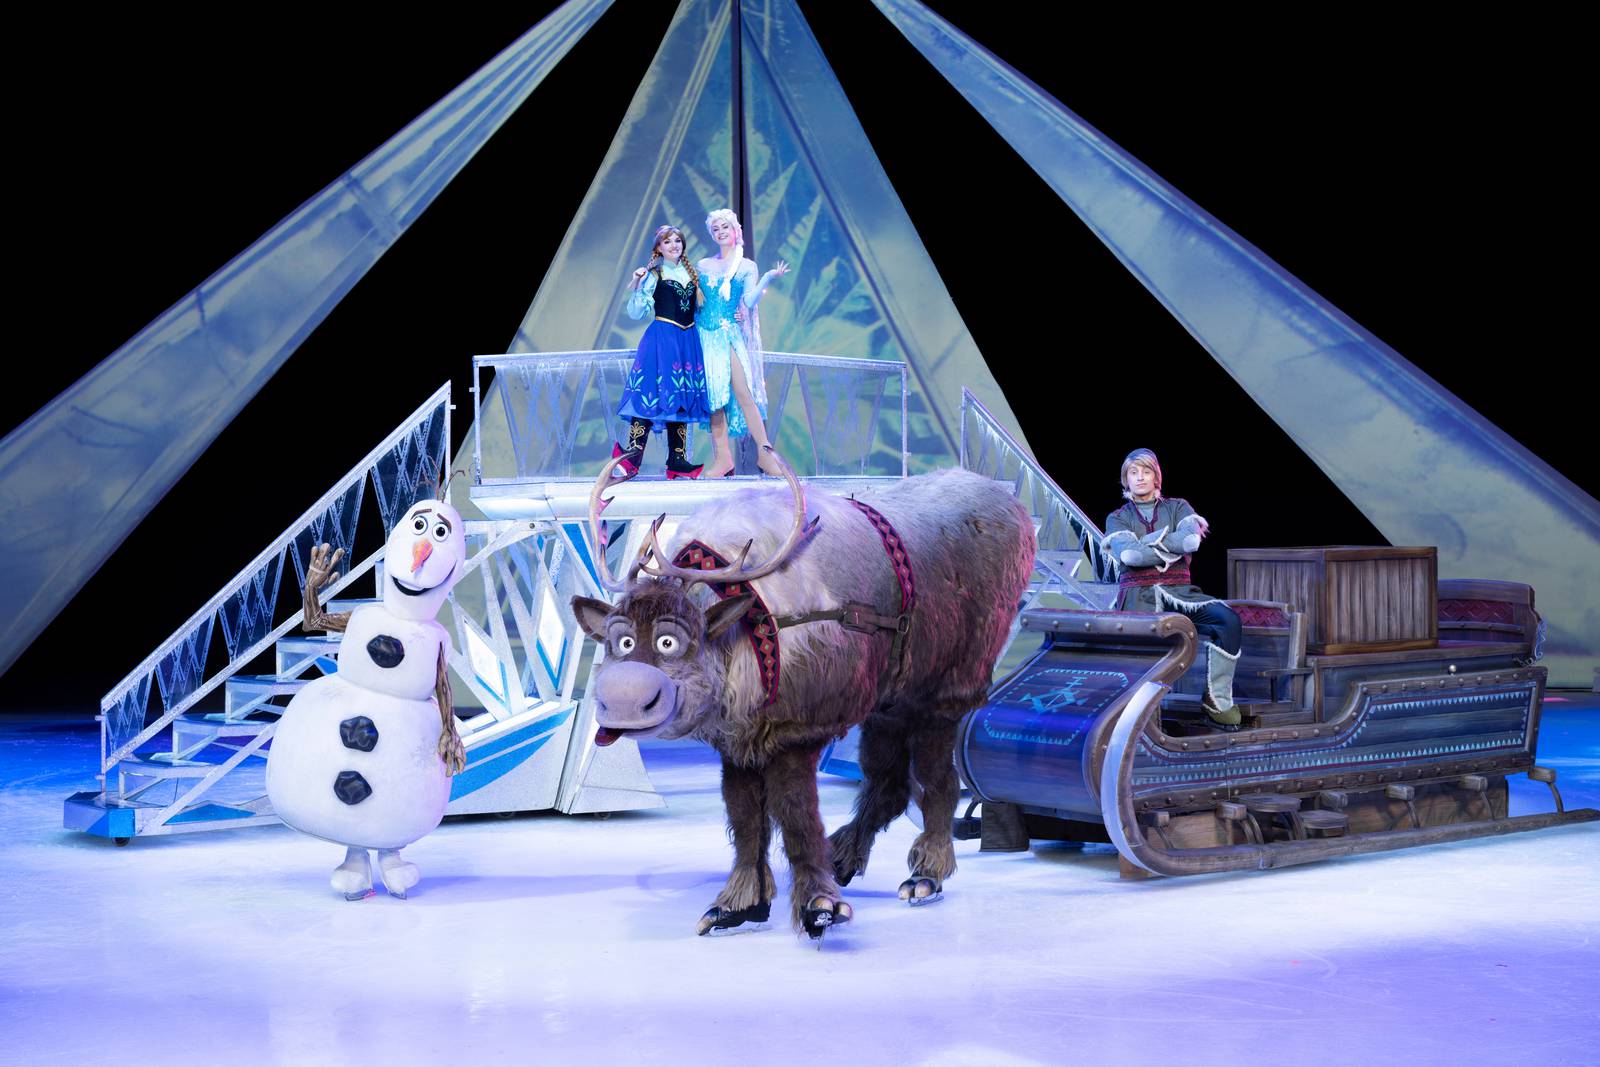 Disney on Ice returns to Amway for 2023 with magic of Frozen and